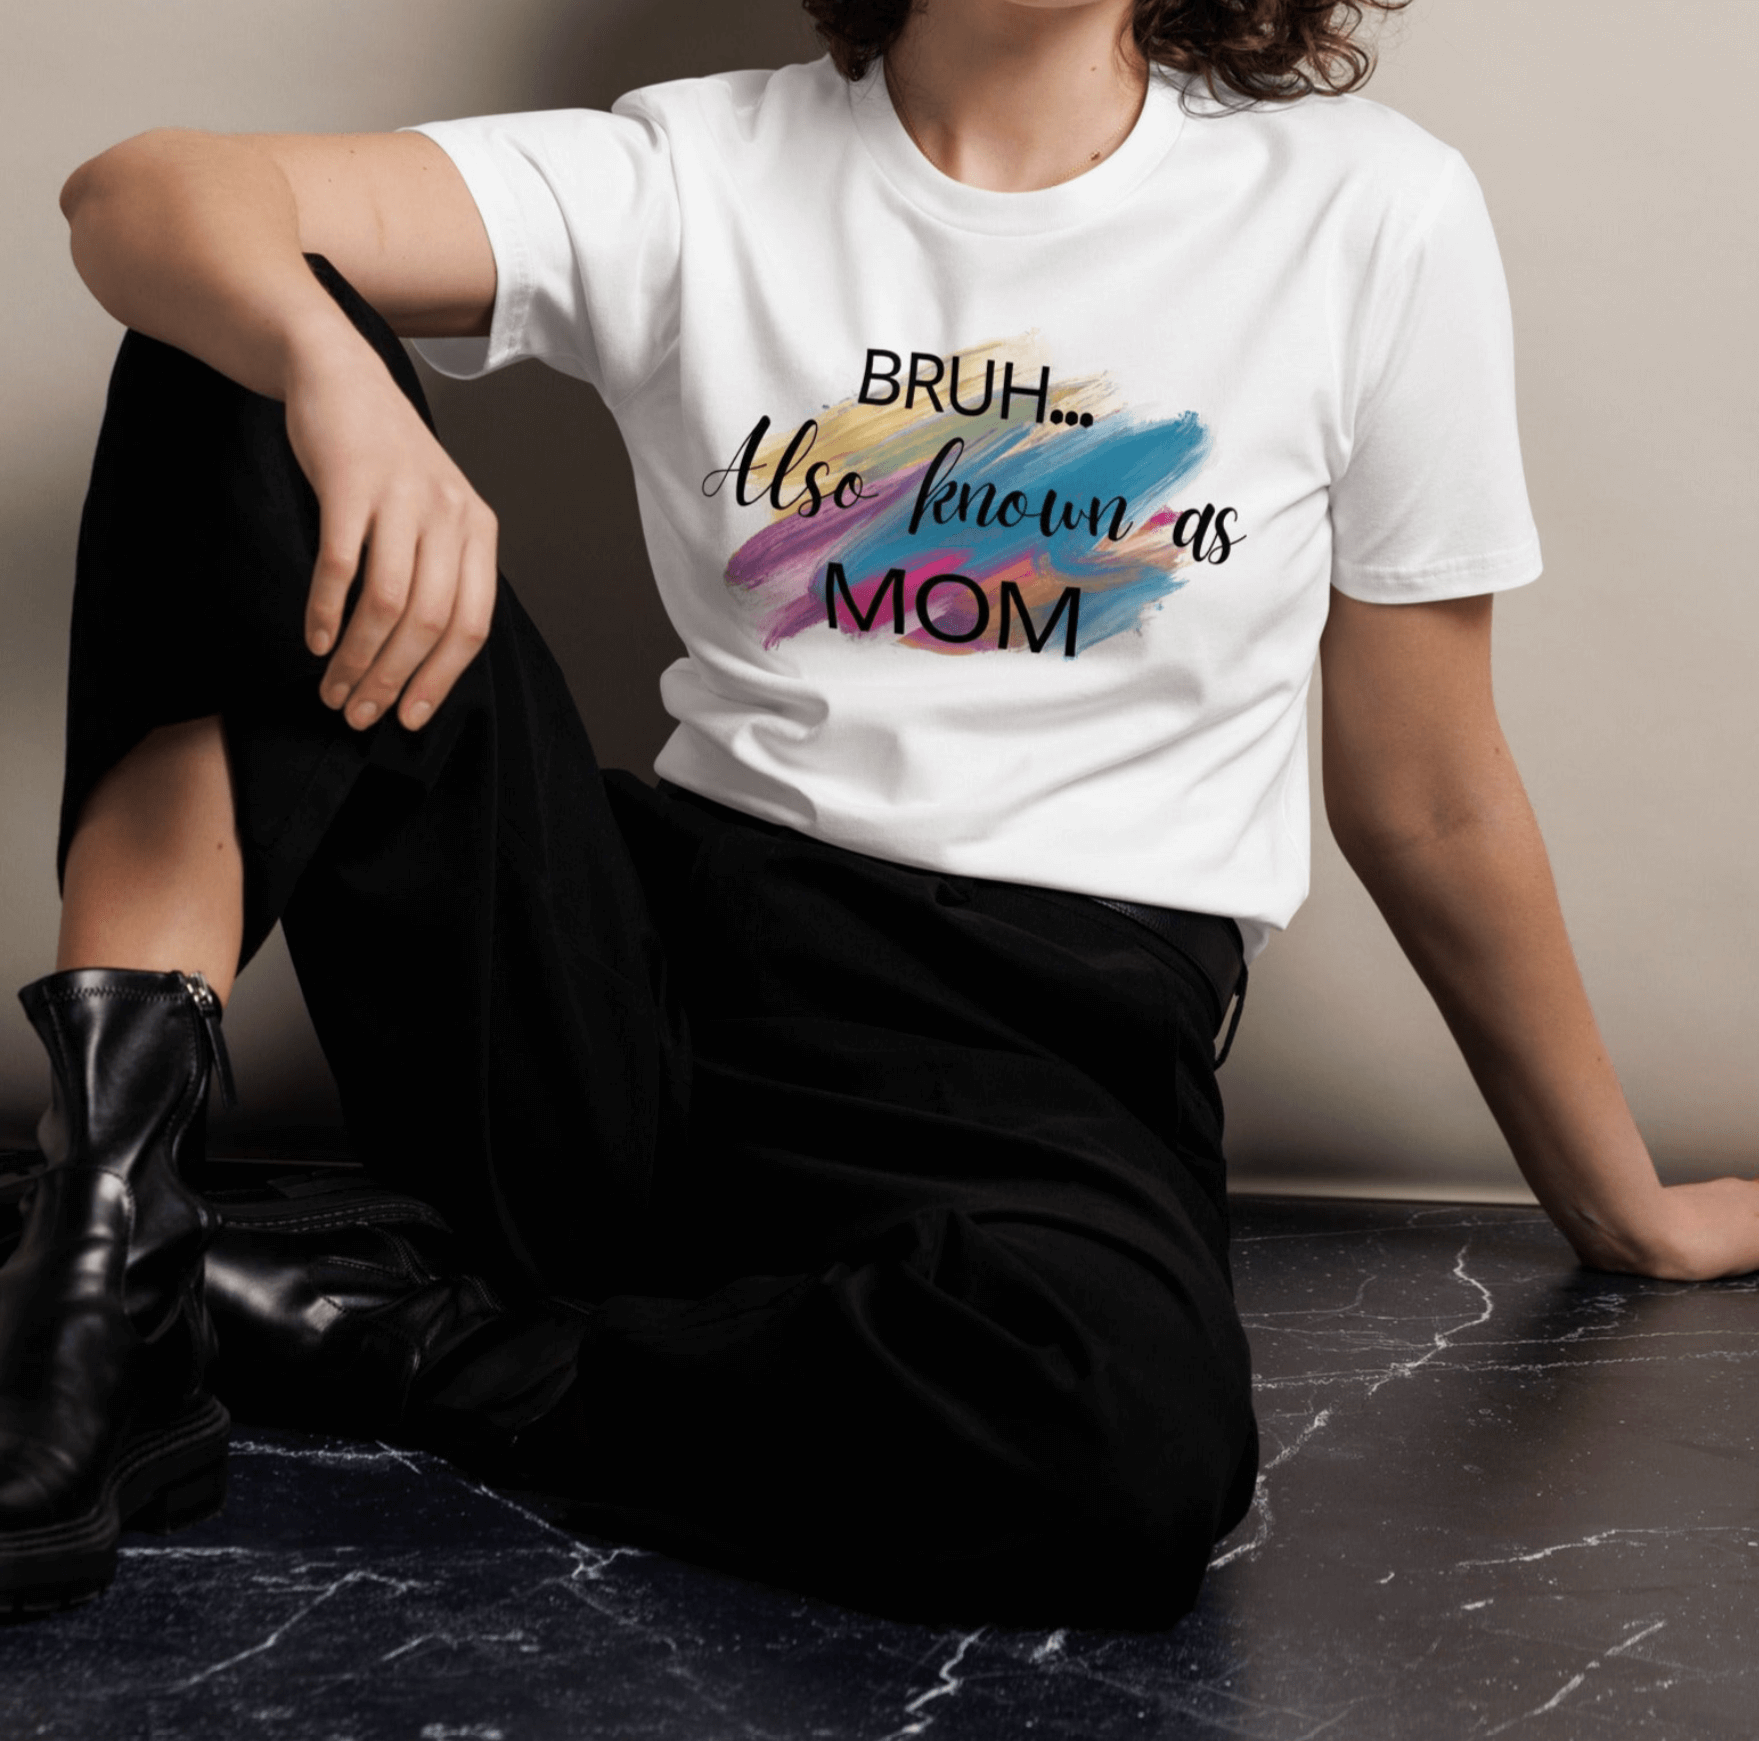 mom graphic t shirts, mama shirt, happy mothers day shirt, funny mom shirts for women, hilarious mommy shirt